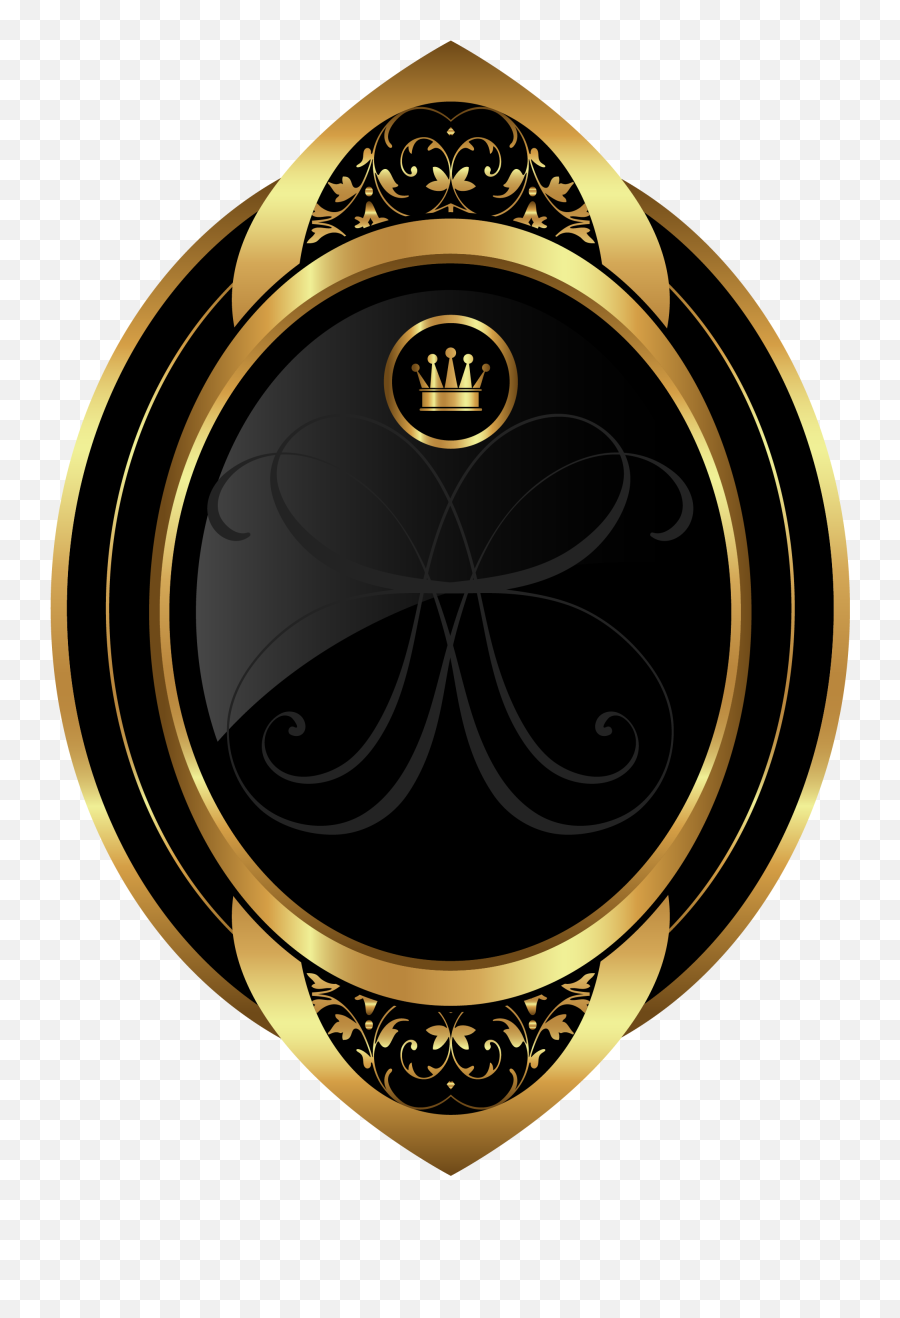 Download Free Painted Golden Crown Hand Free Clipart Hq Icon - Golden Crown On A Black Background Emoji,Gold Crown Png